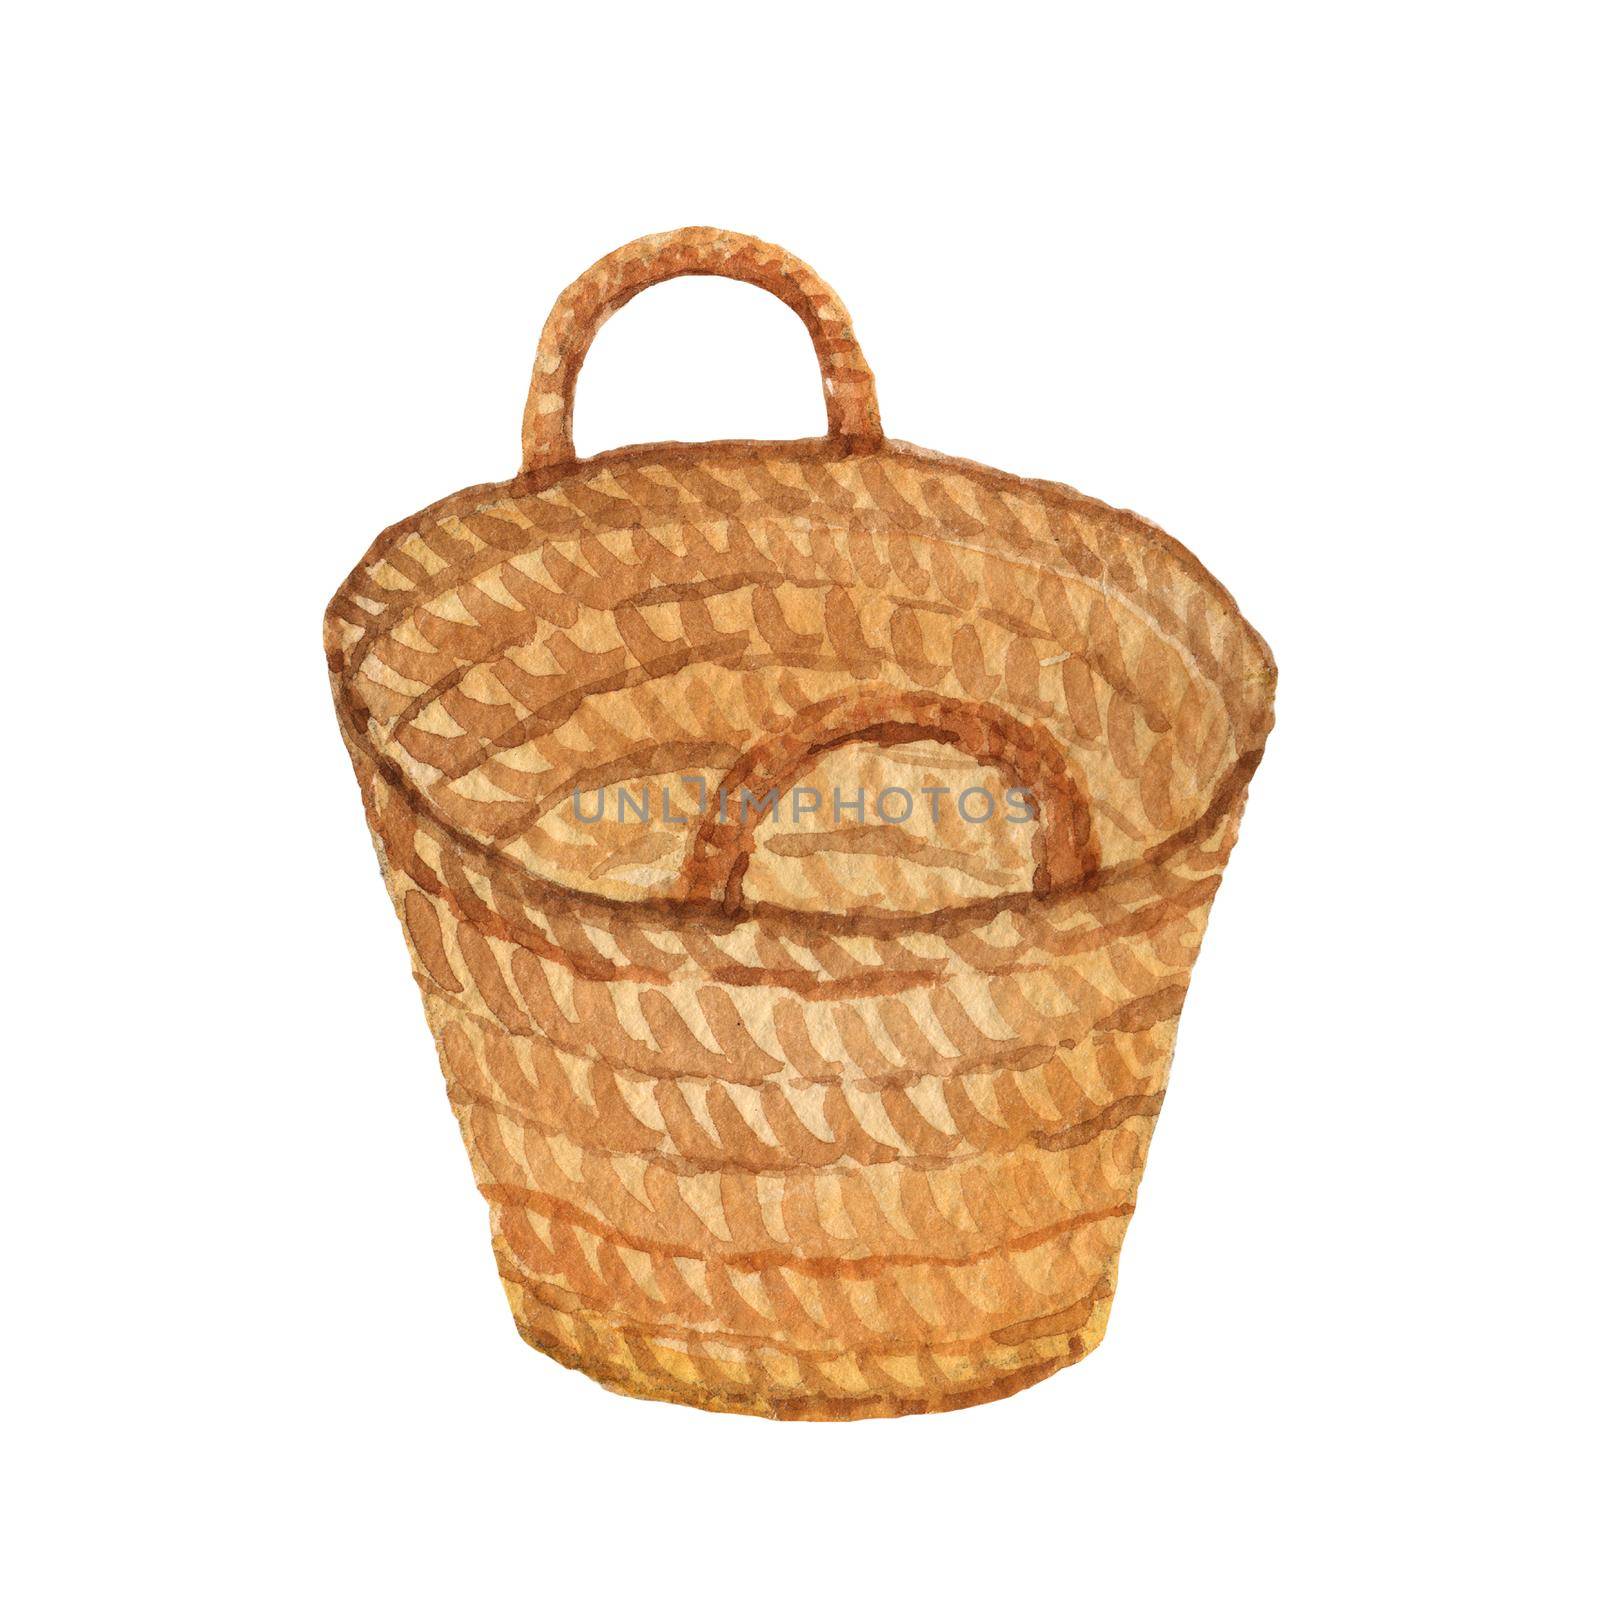 Watercolor illustration of wicker basket isolated on white background. Hand drawn illustration